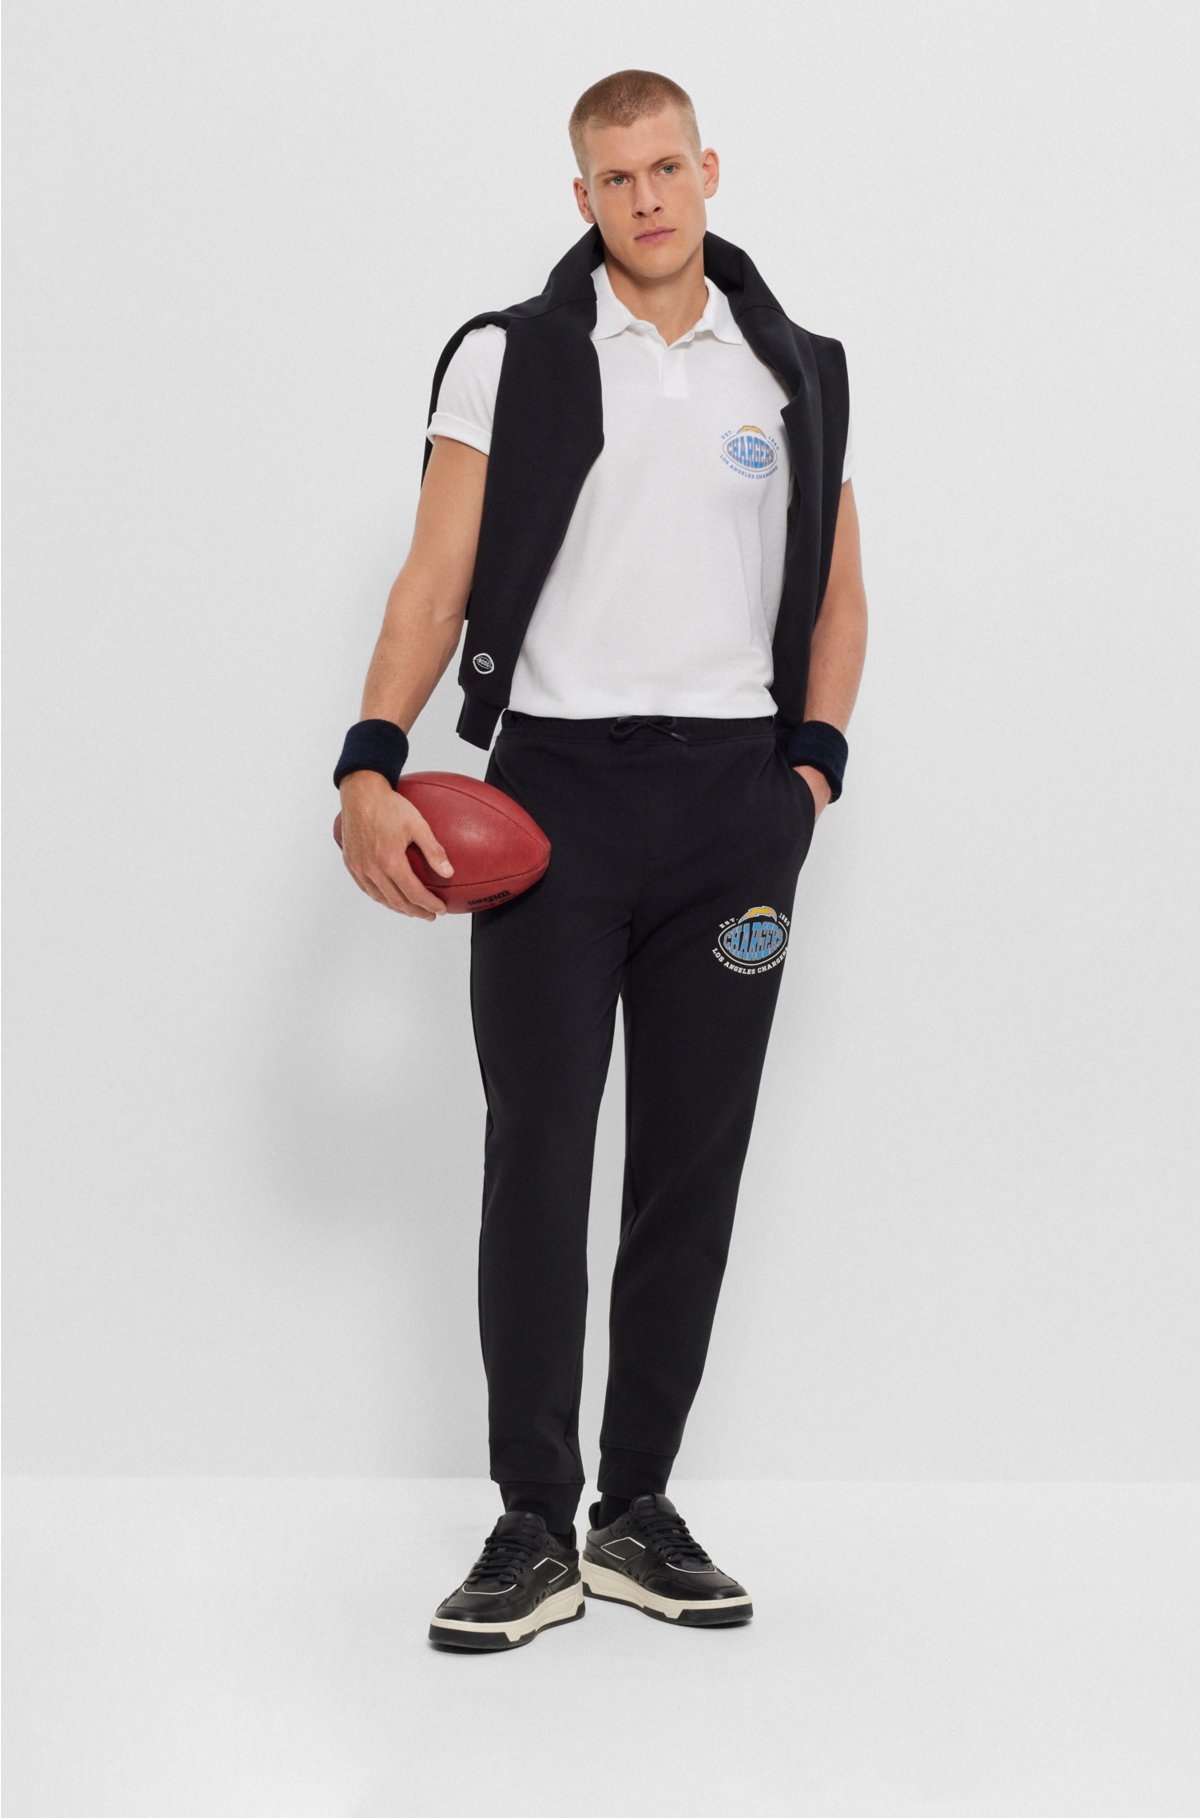 BOSS x NFL cotton-piqué polo shirt with collaborative branding, Chargers